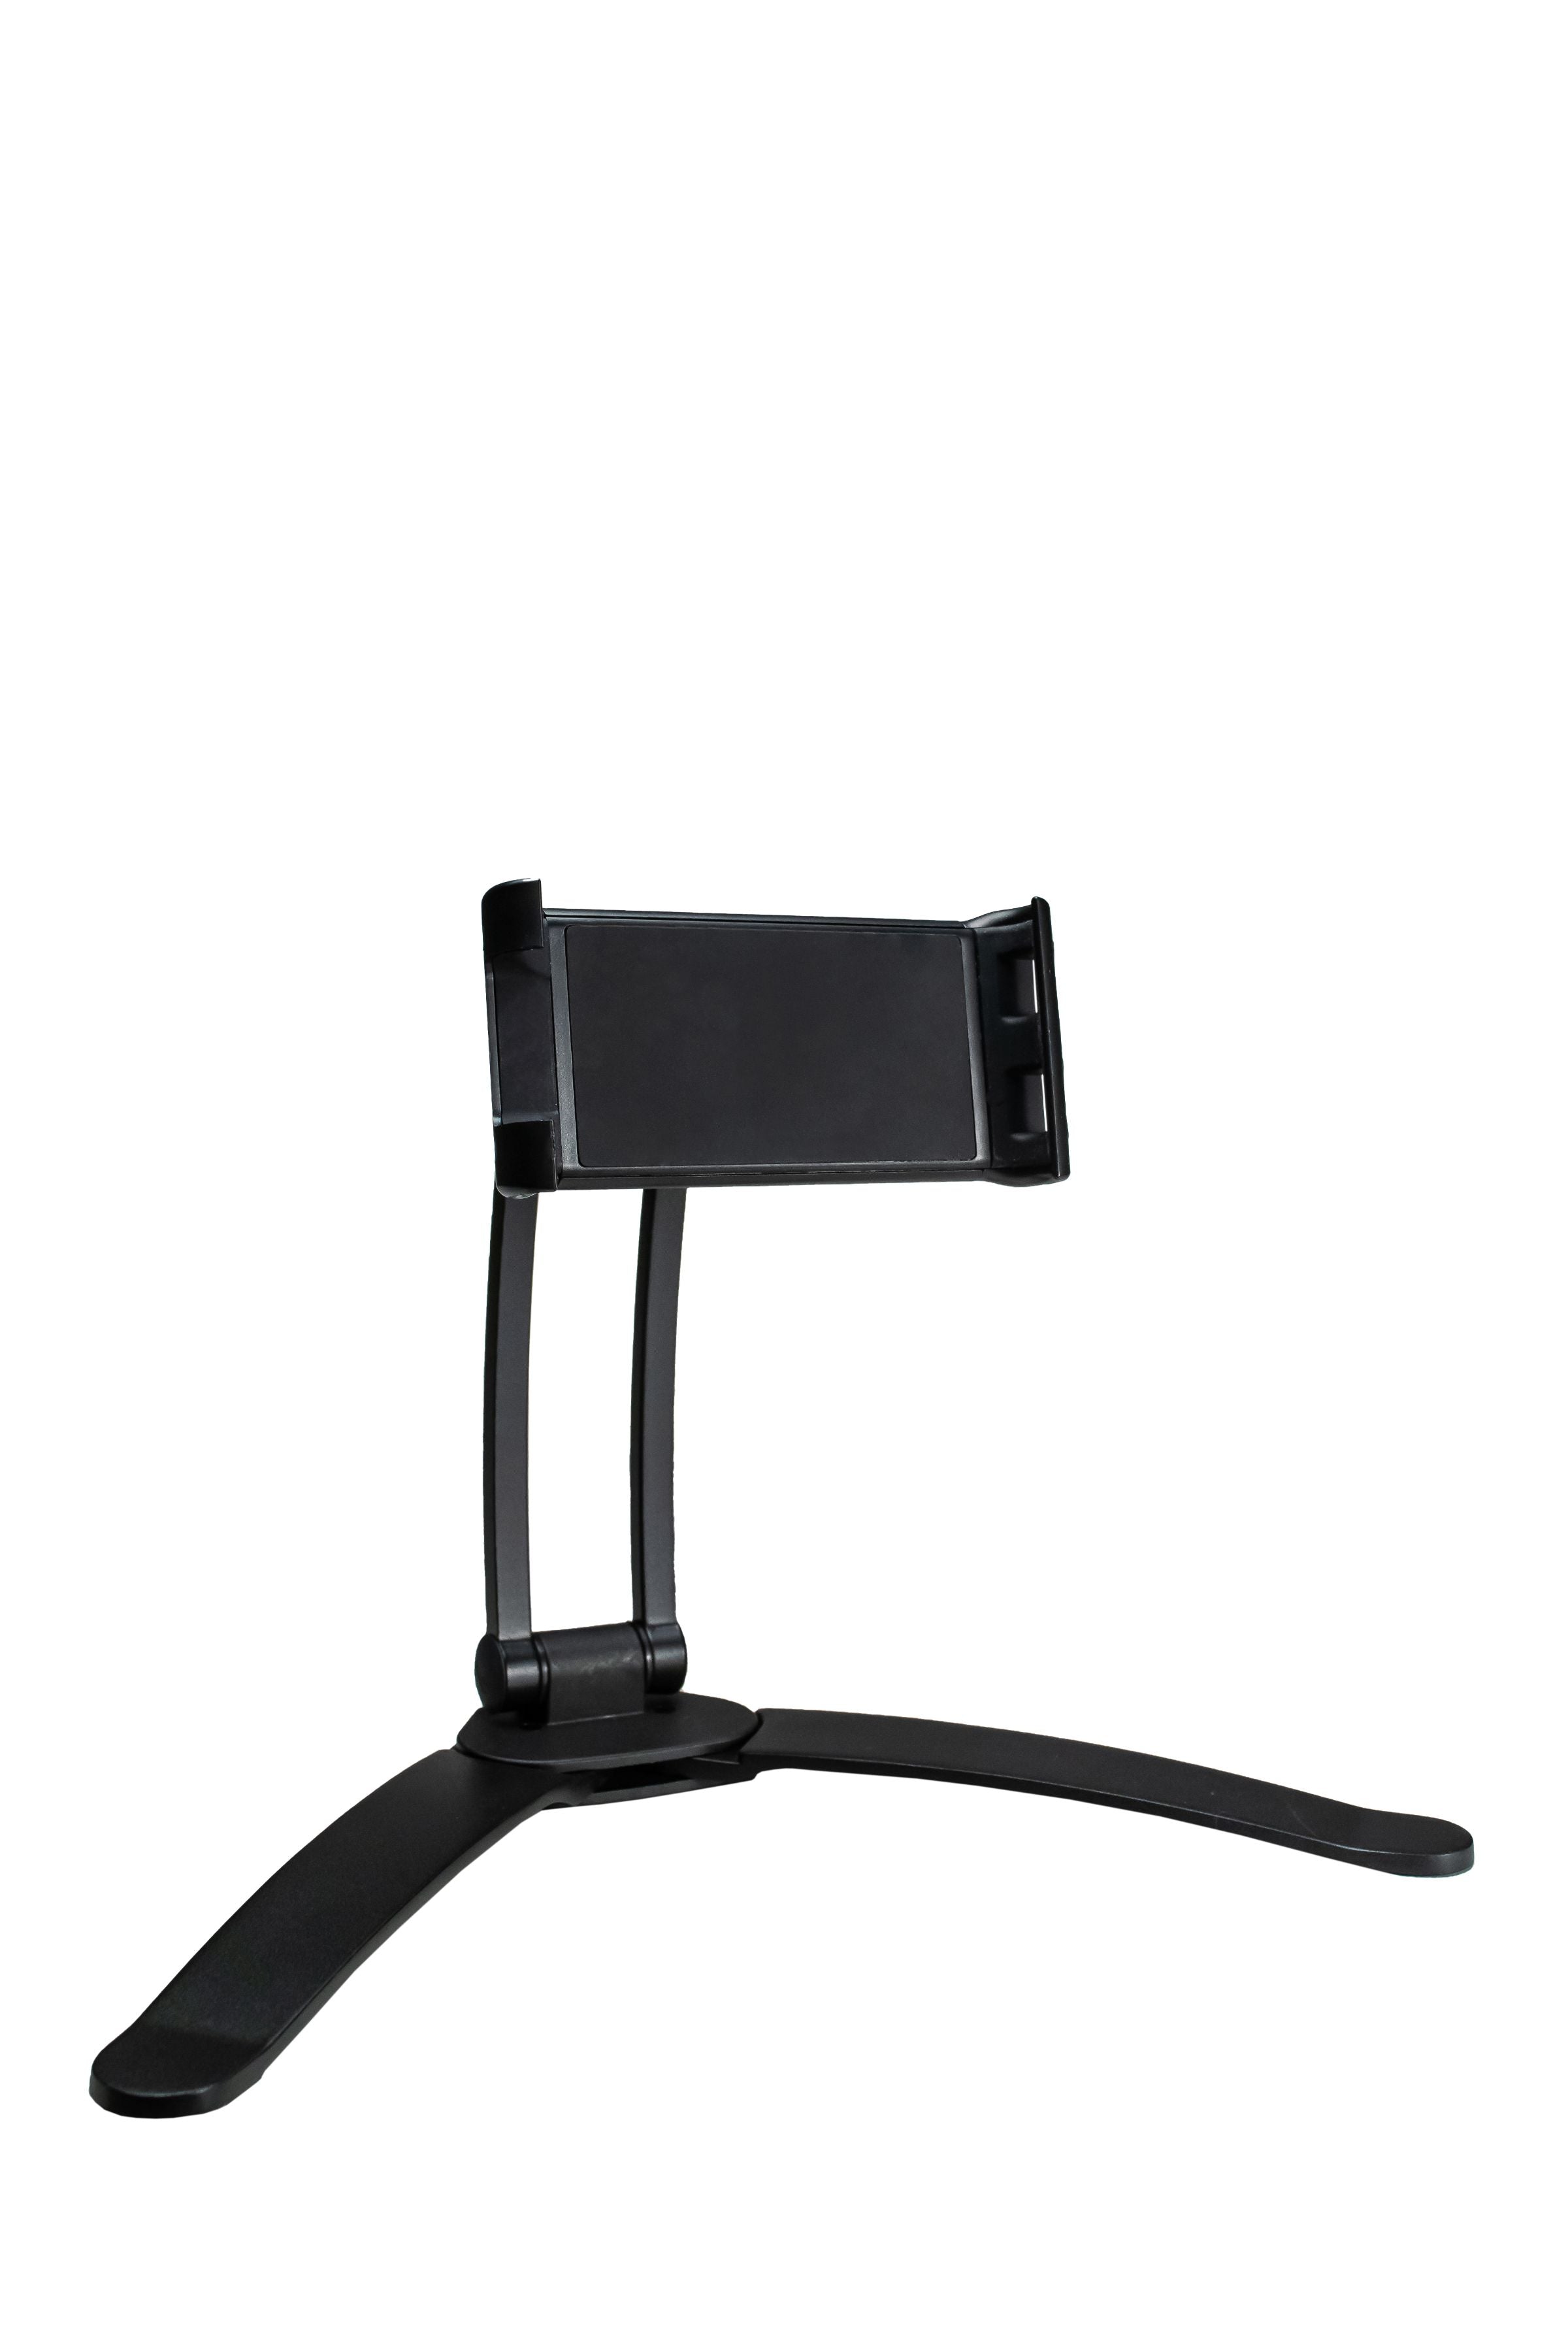 Multi-Joint Desk and Wall Mount for Tablets and Smartphones